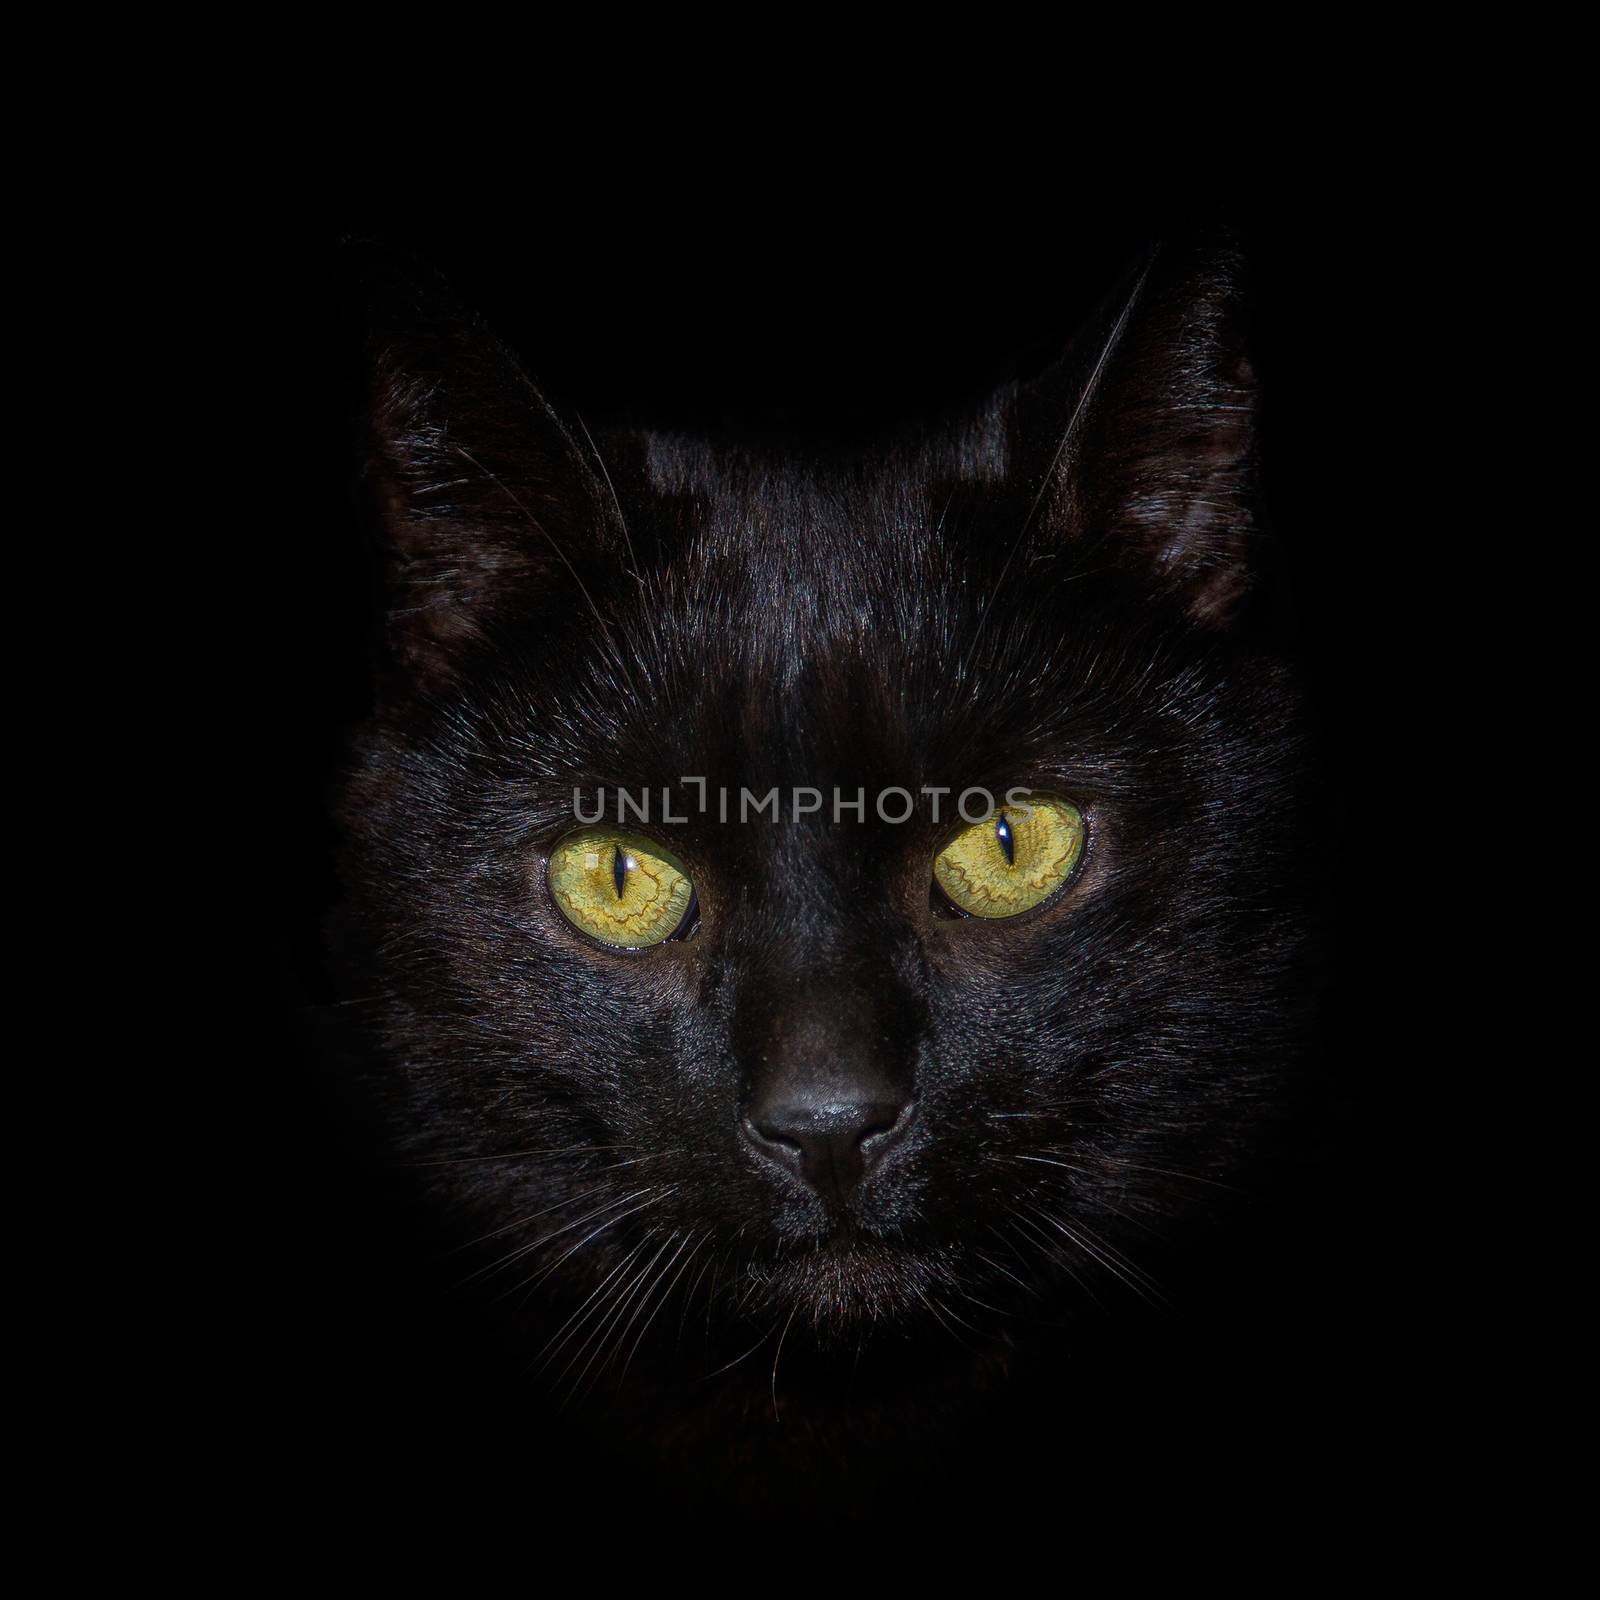 A head shot of a black cat against a black background by sandra_fotodesign